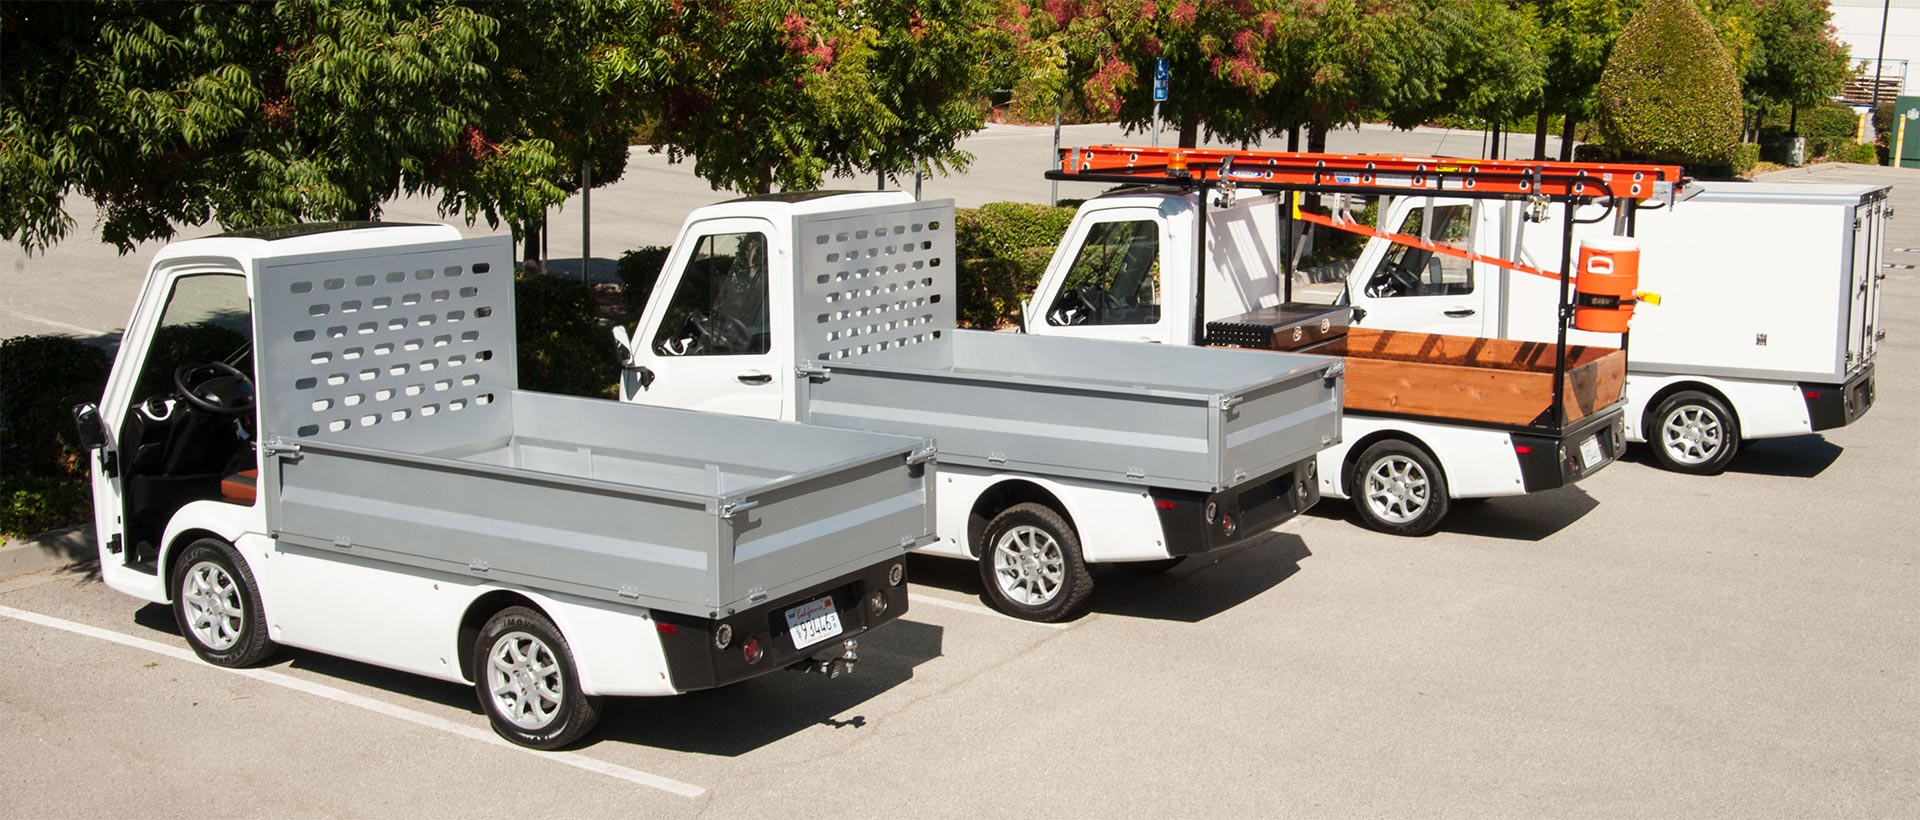 Electric Utility Vehicles Street Legal